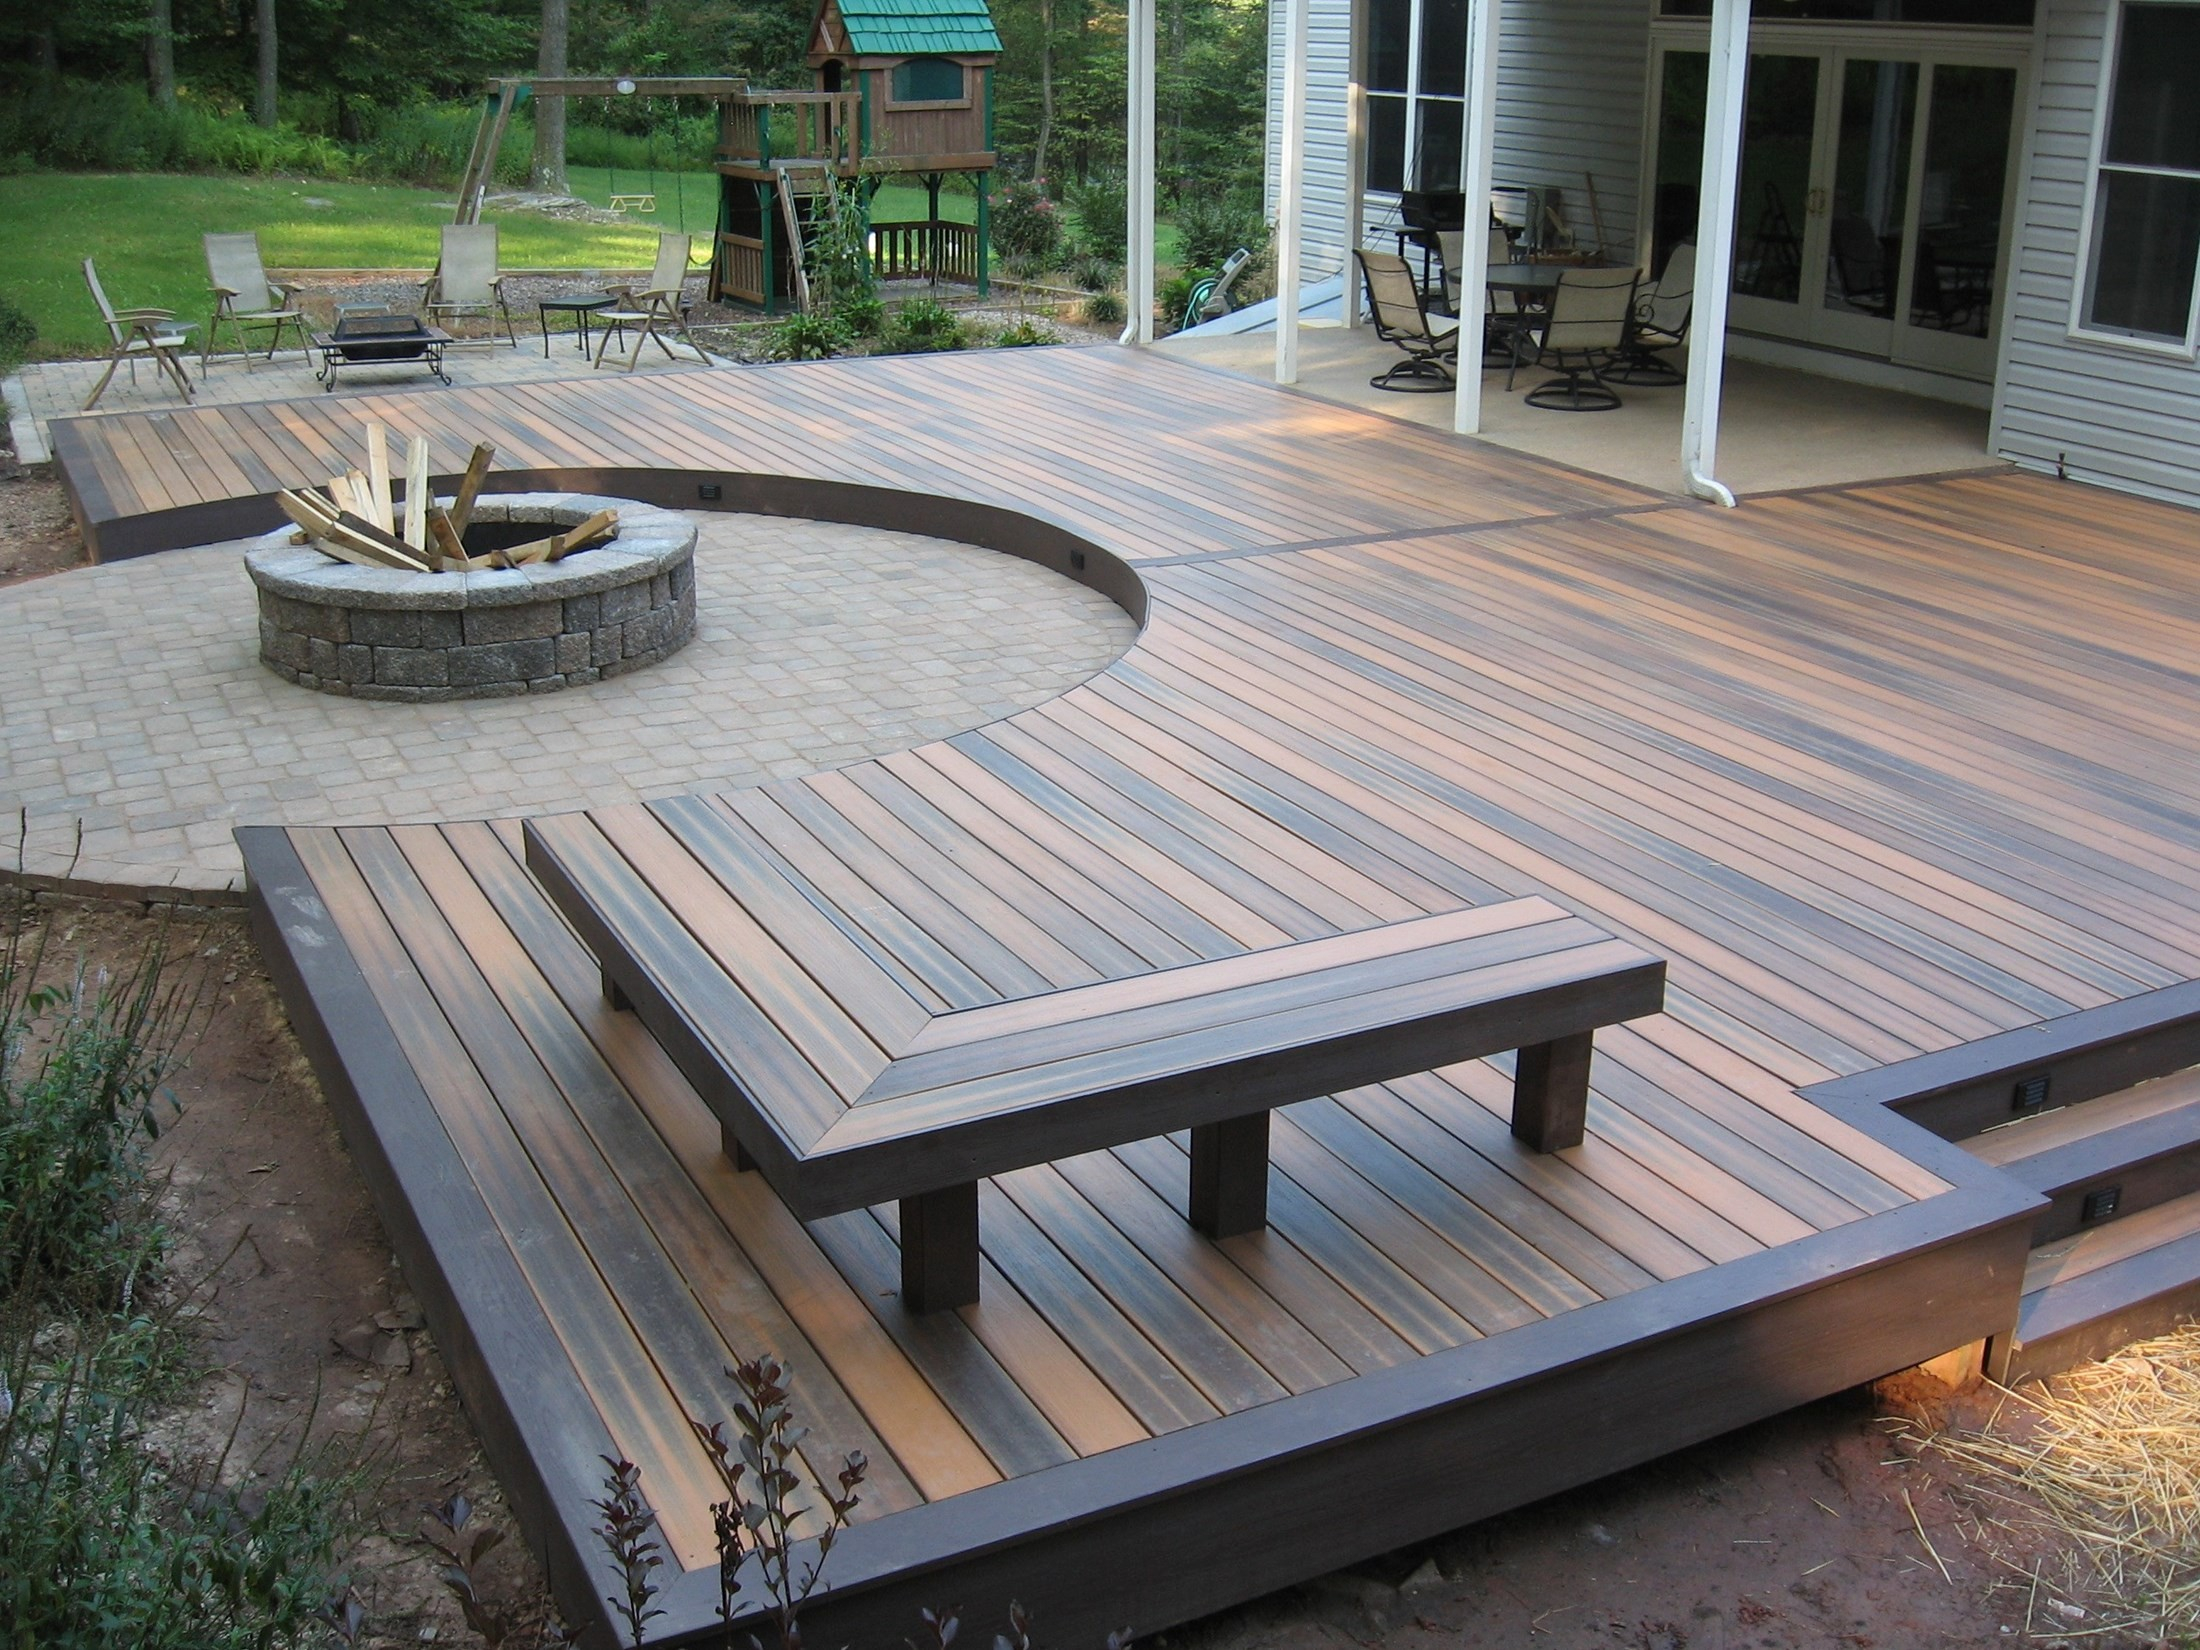 Deck Color Schemes Pictures Awesome Outdoor Deck Paint Colors in sizing 2200 X 1650